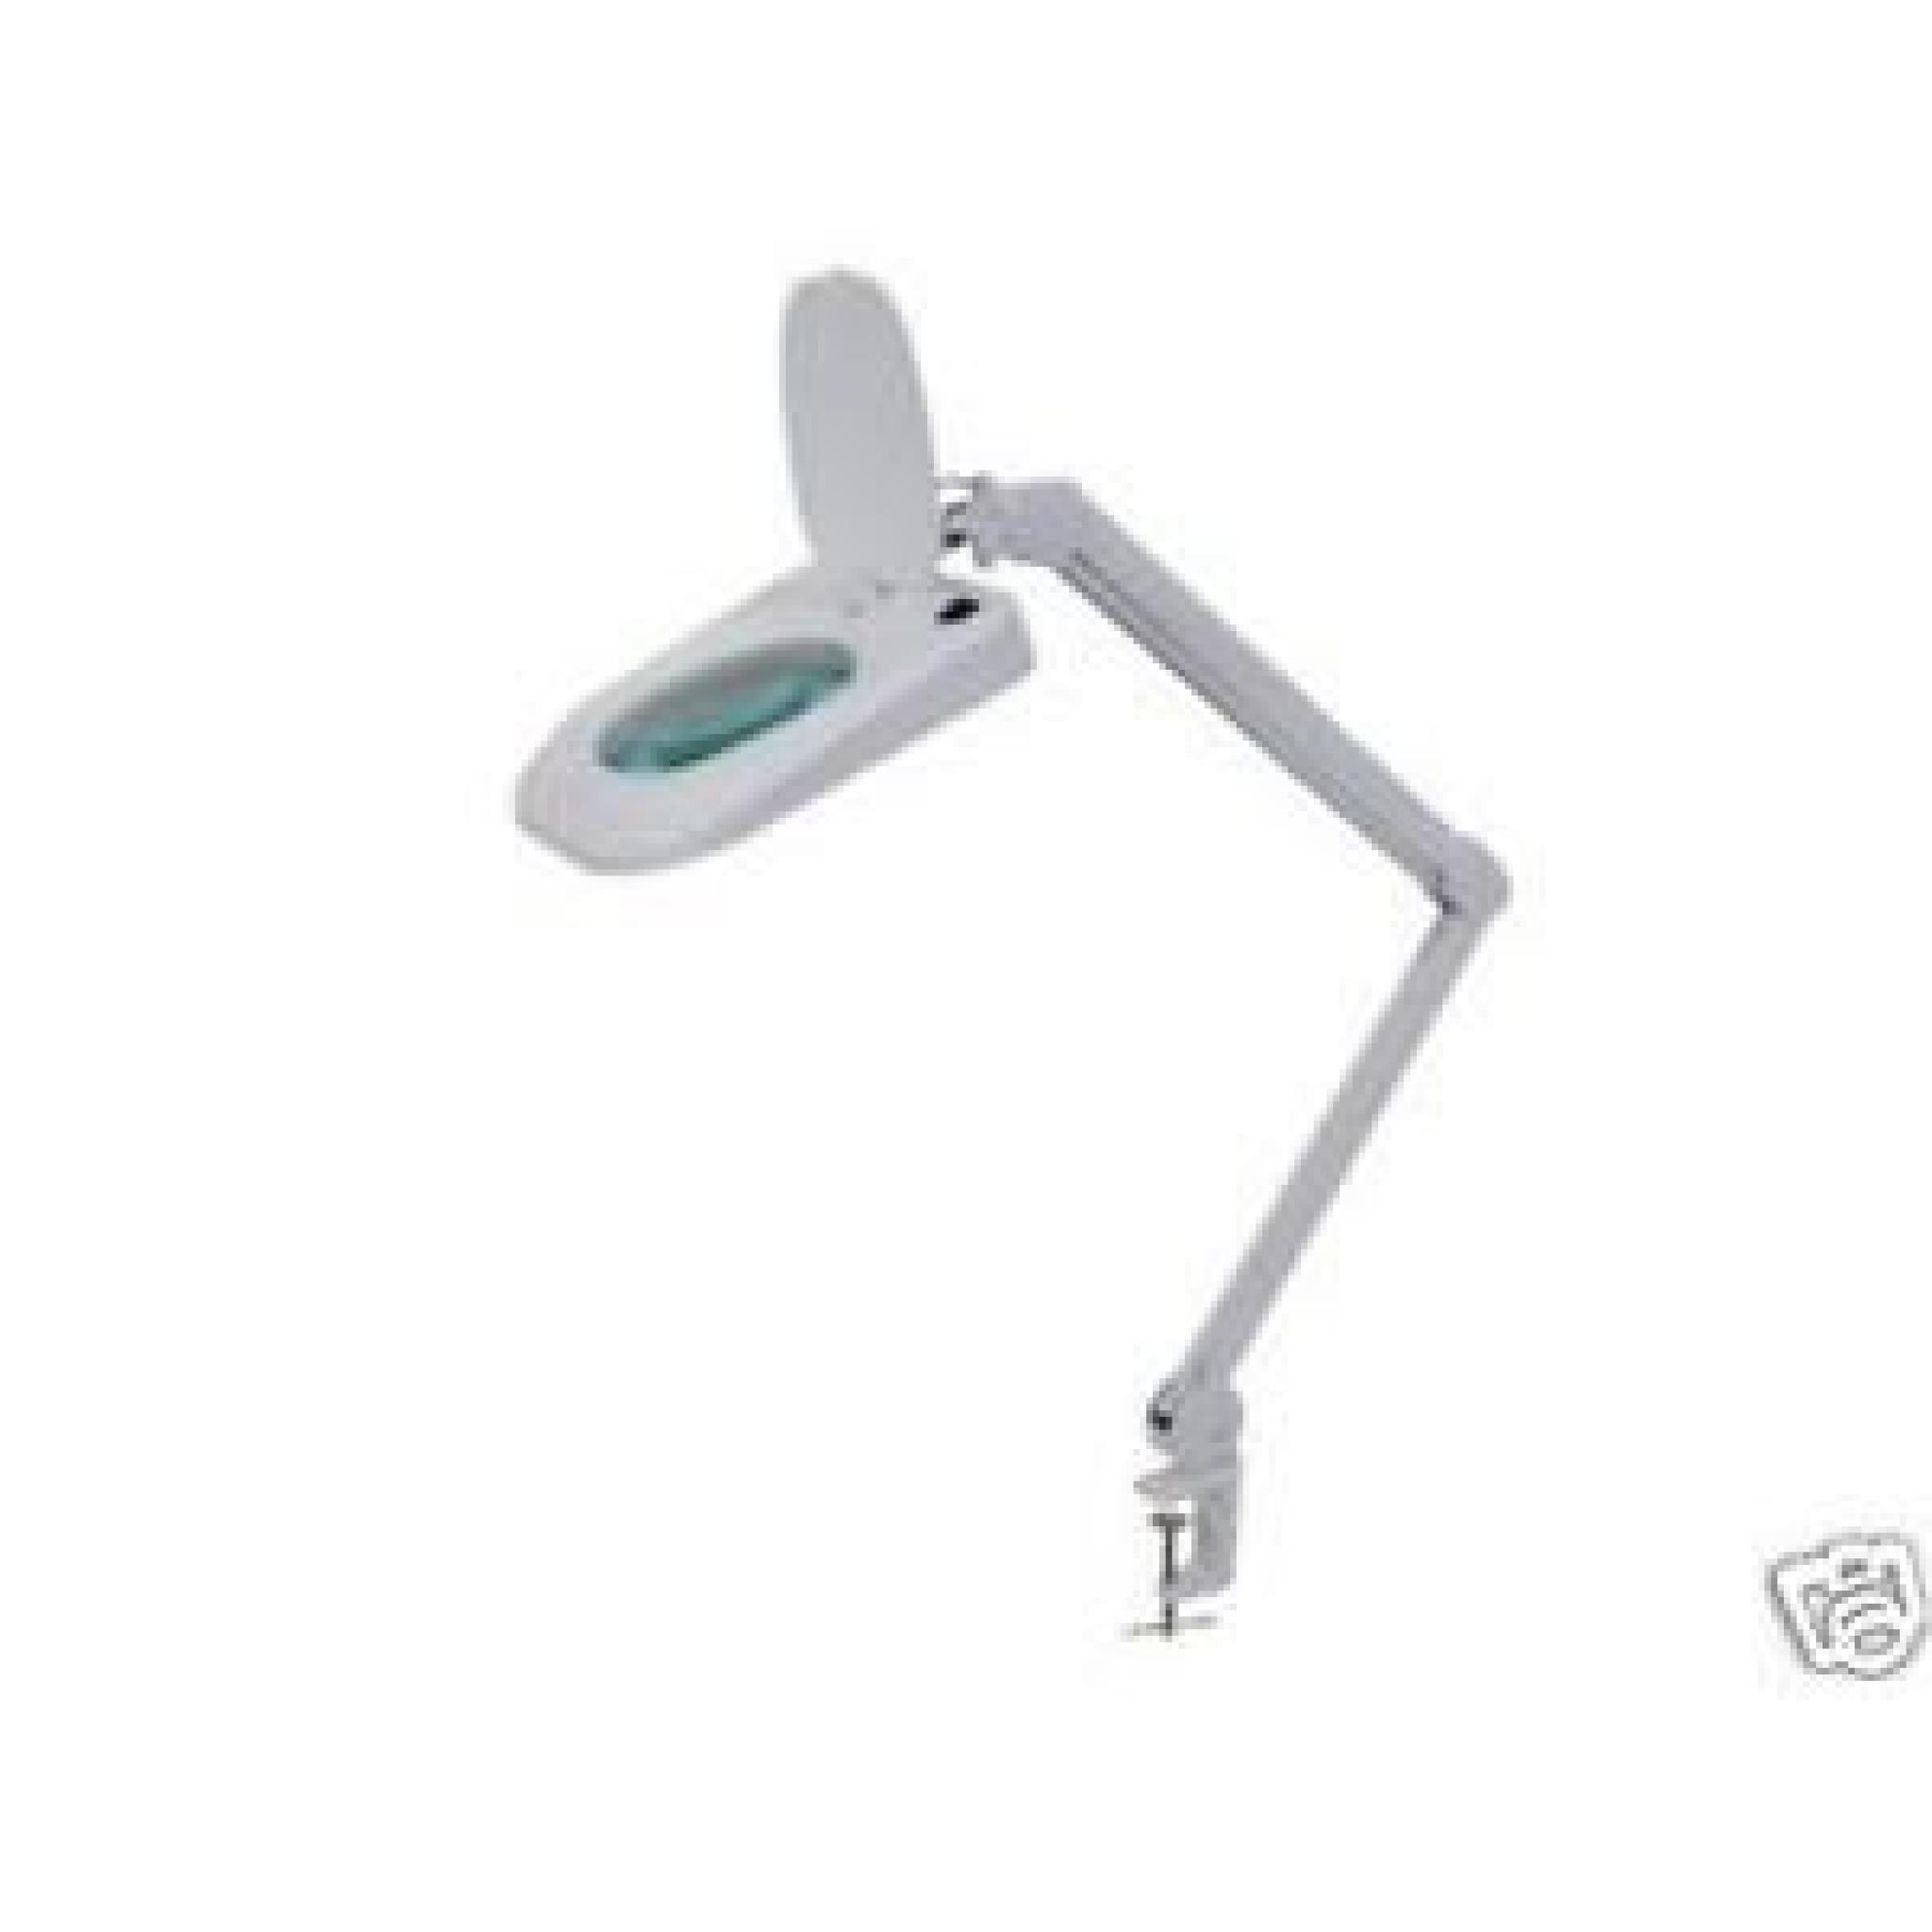 LAMPE LOUPE BRICOLAGE 5 DIOPTRIES 64 LED 